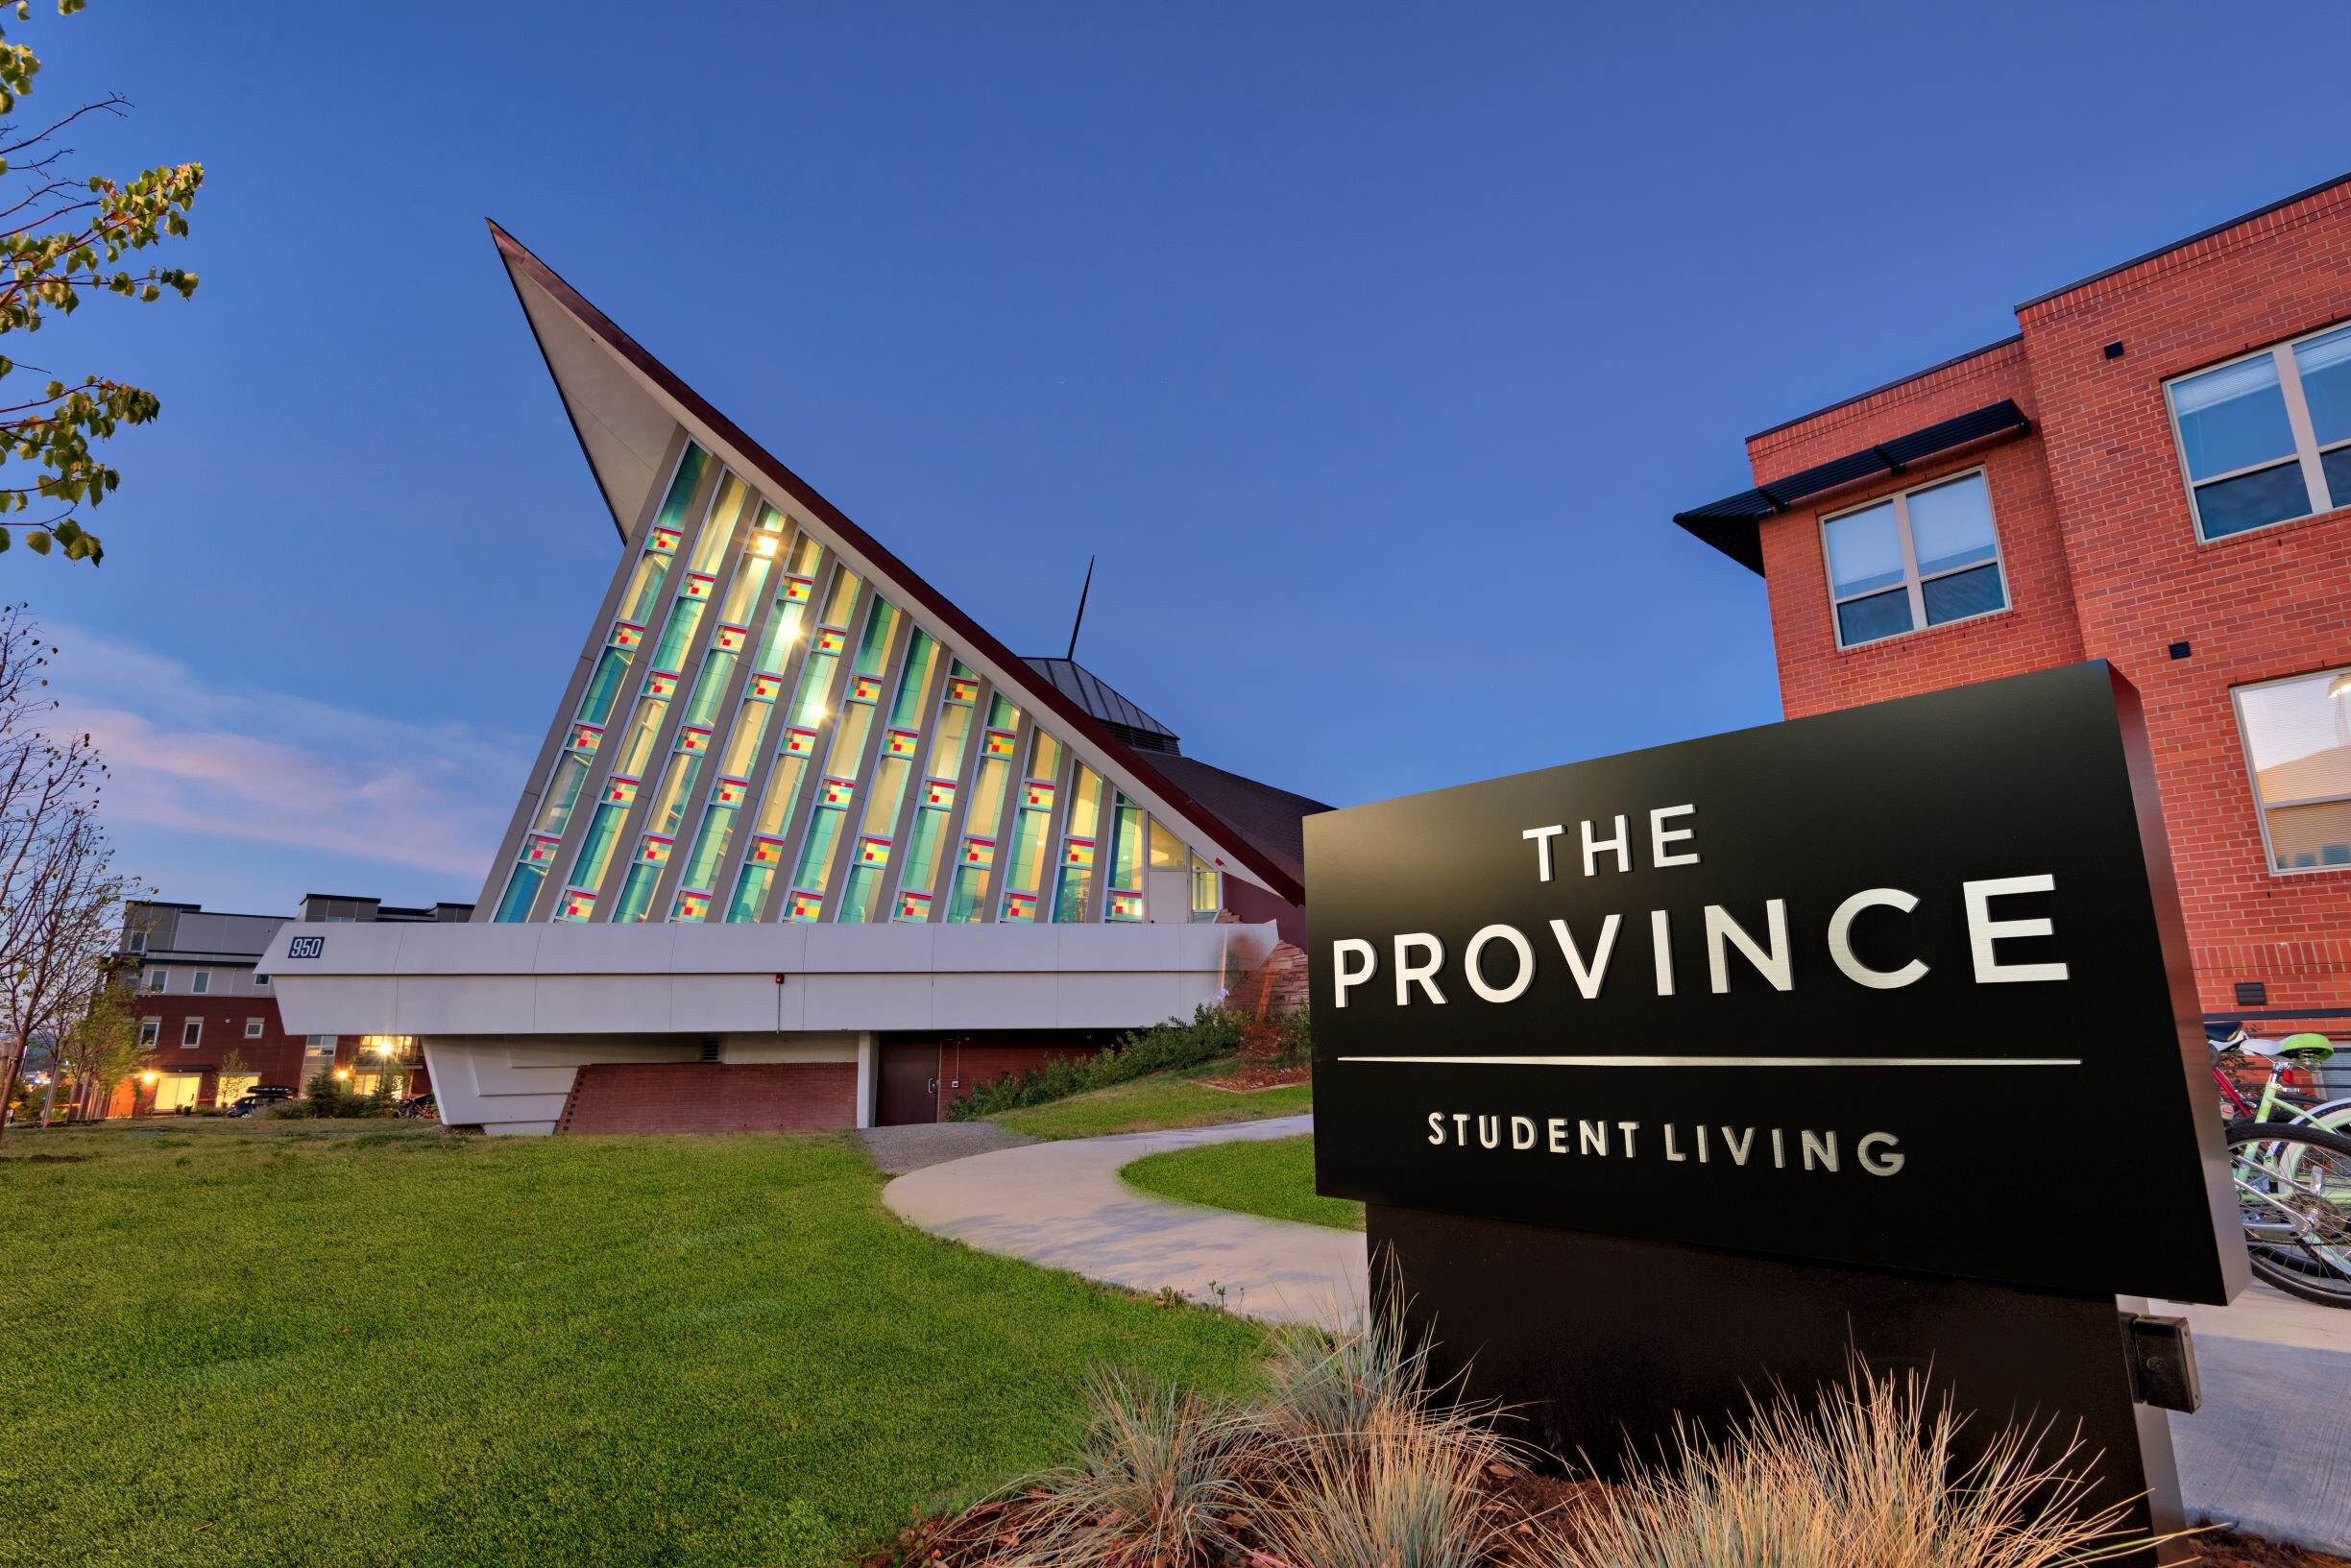 THE PROVINCE STUDENT LIVING